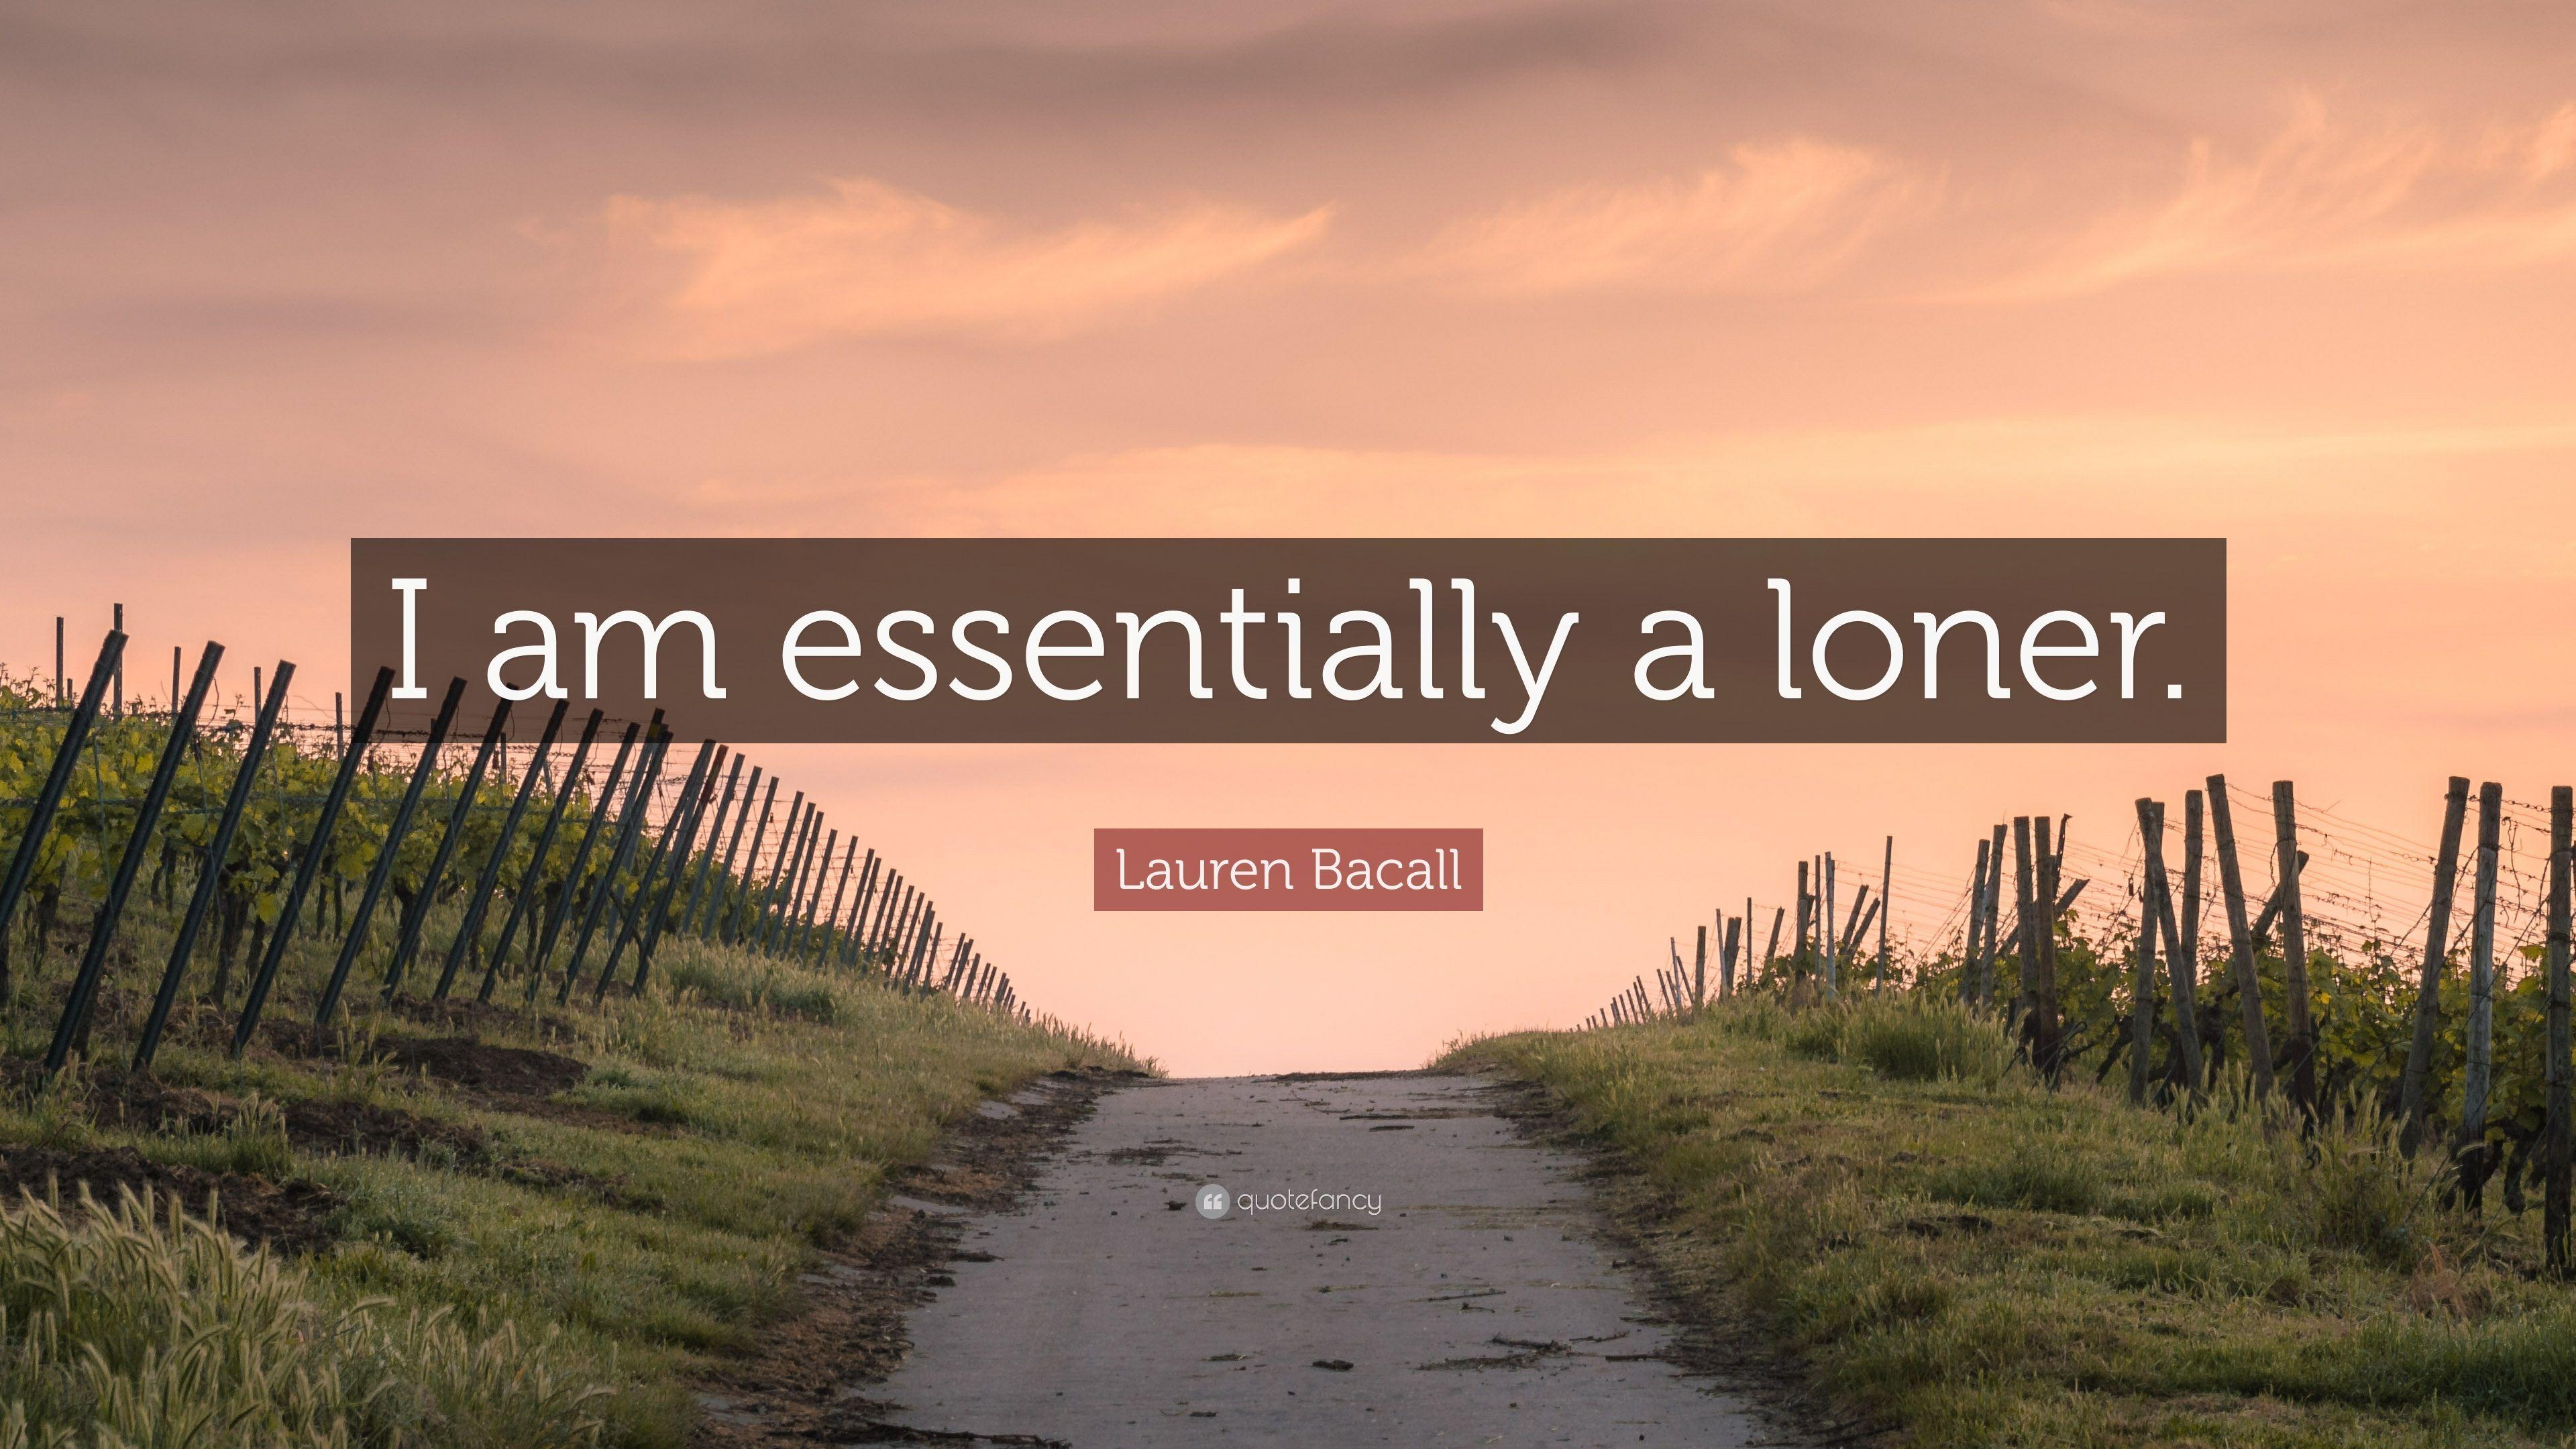 Lauren Bacall Quote: “I am essentially a loner.” 7 wallpaper